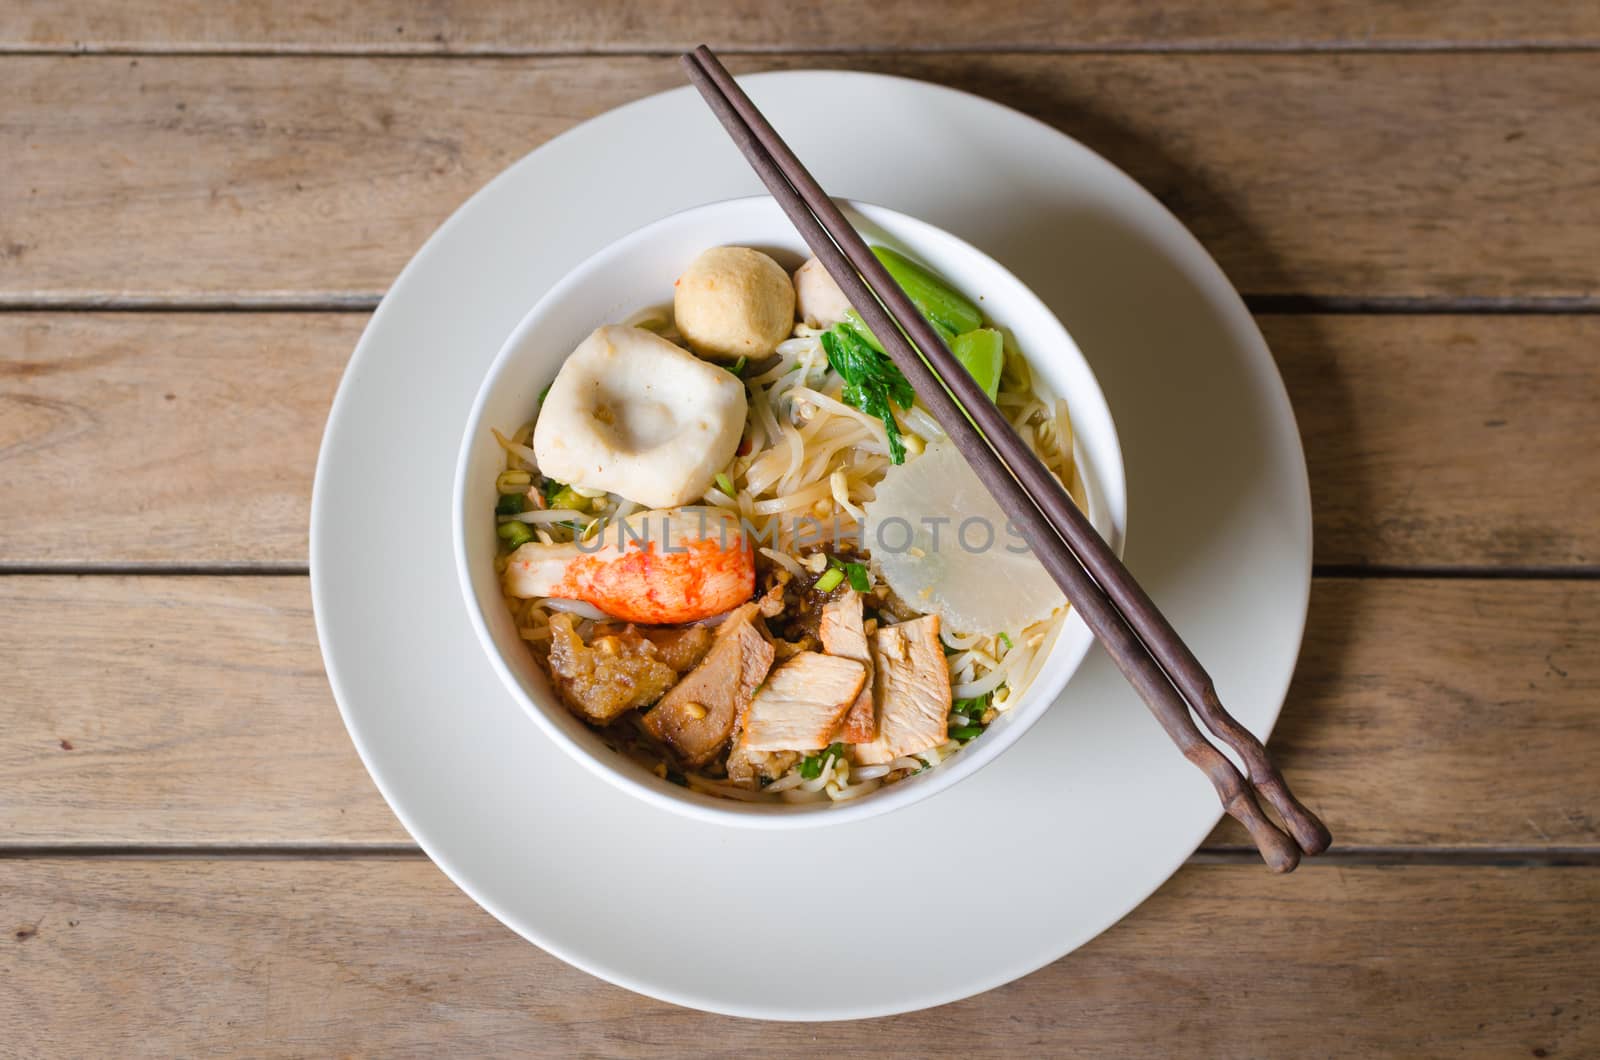 noodle with fish ball and pork is traditional food in Thailand